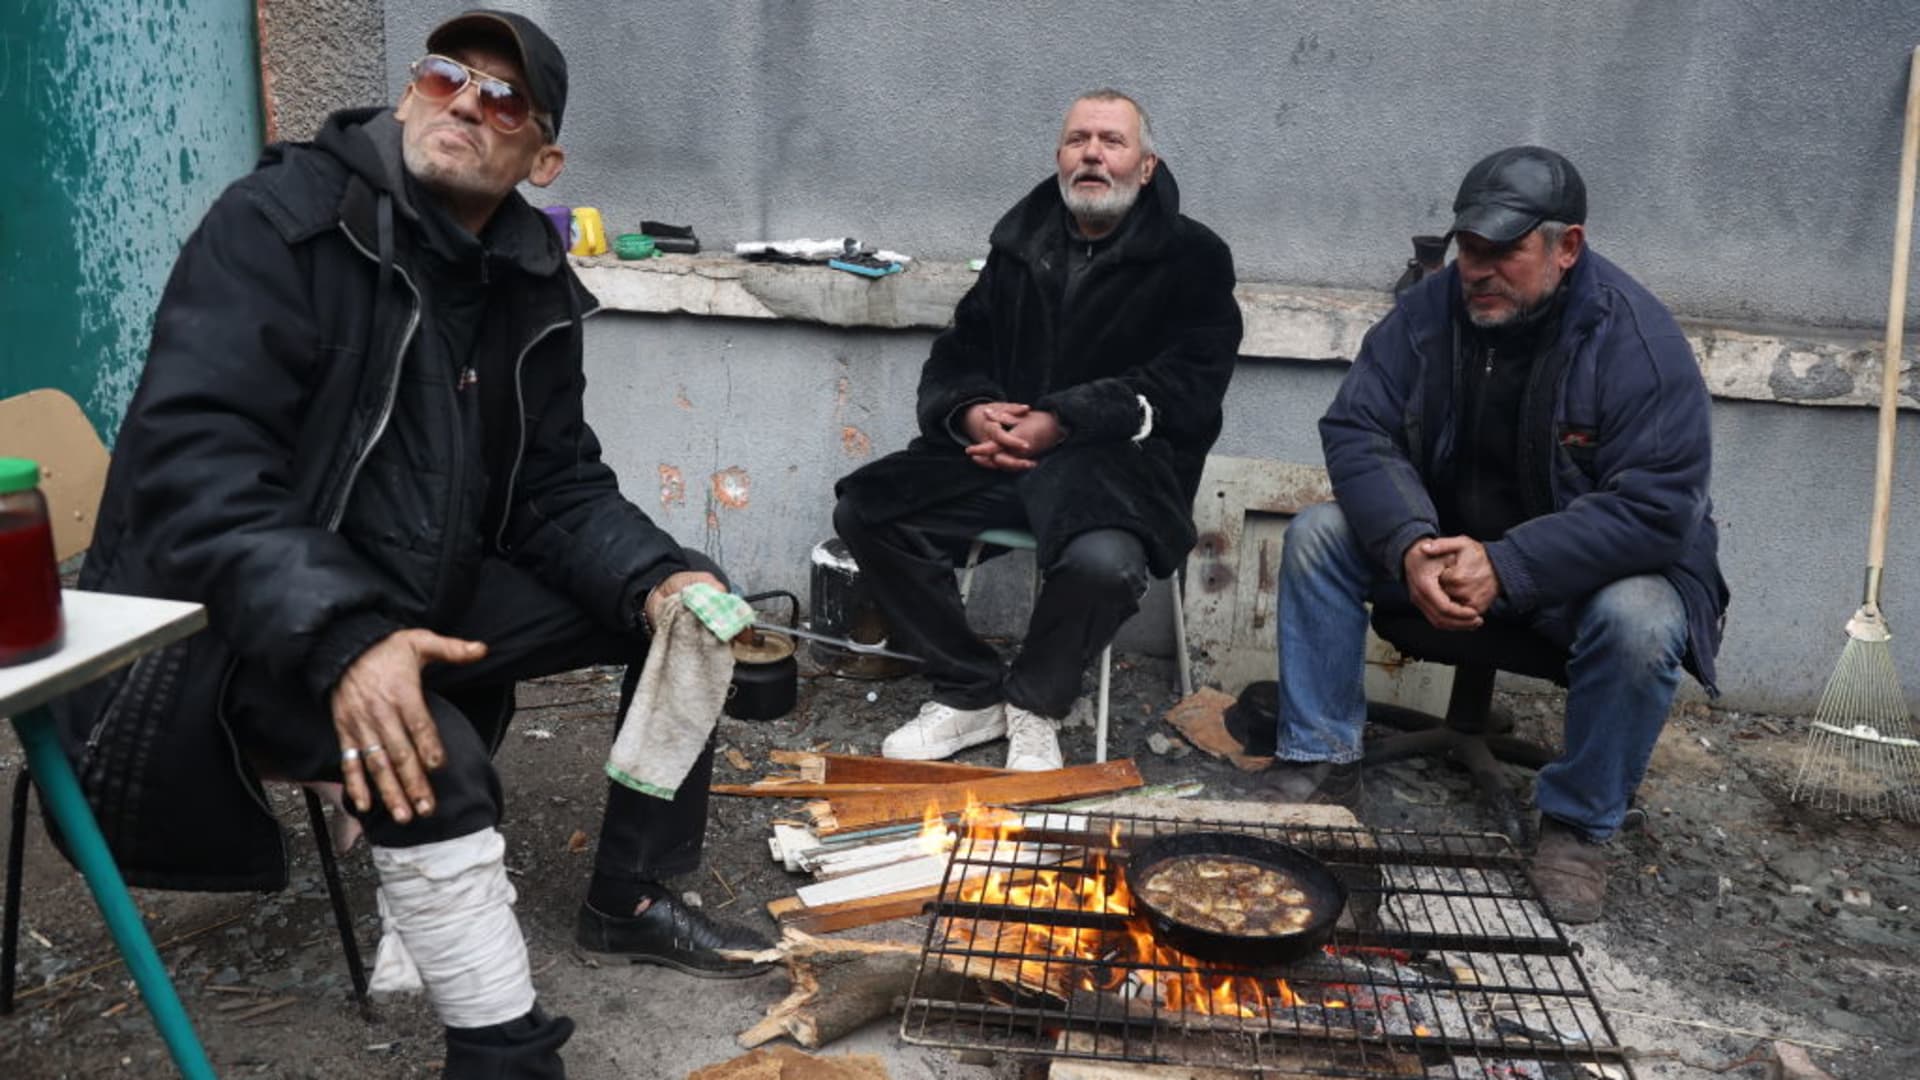 People cook a meal in Ukraine's besieged port city of Mariupol on April 4, 2022.